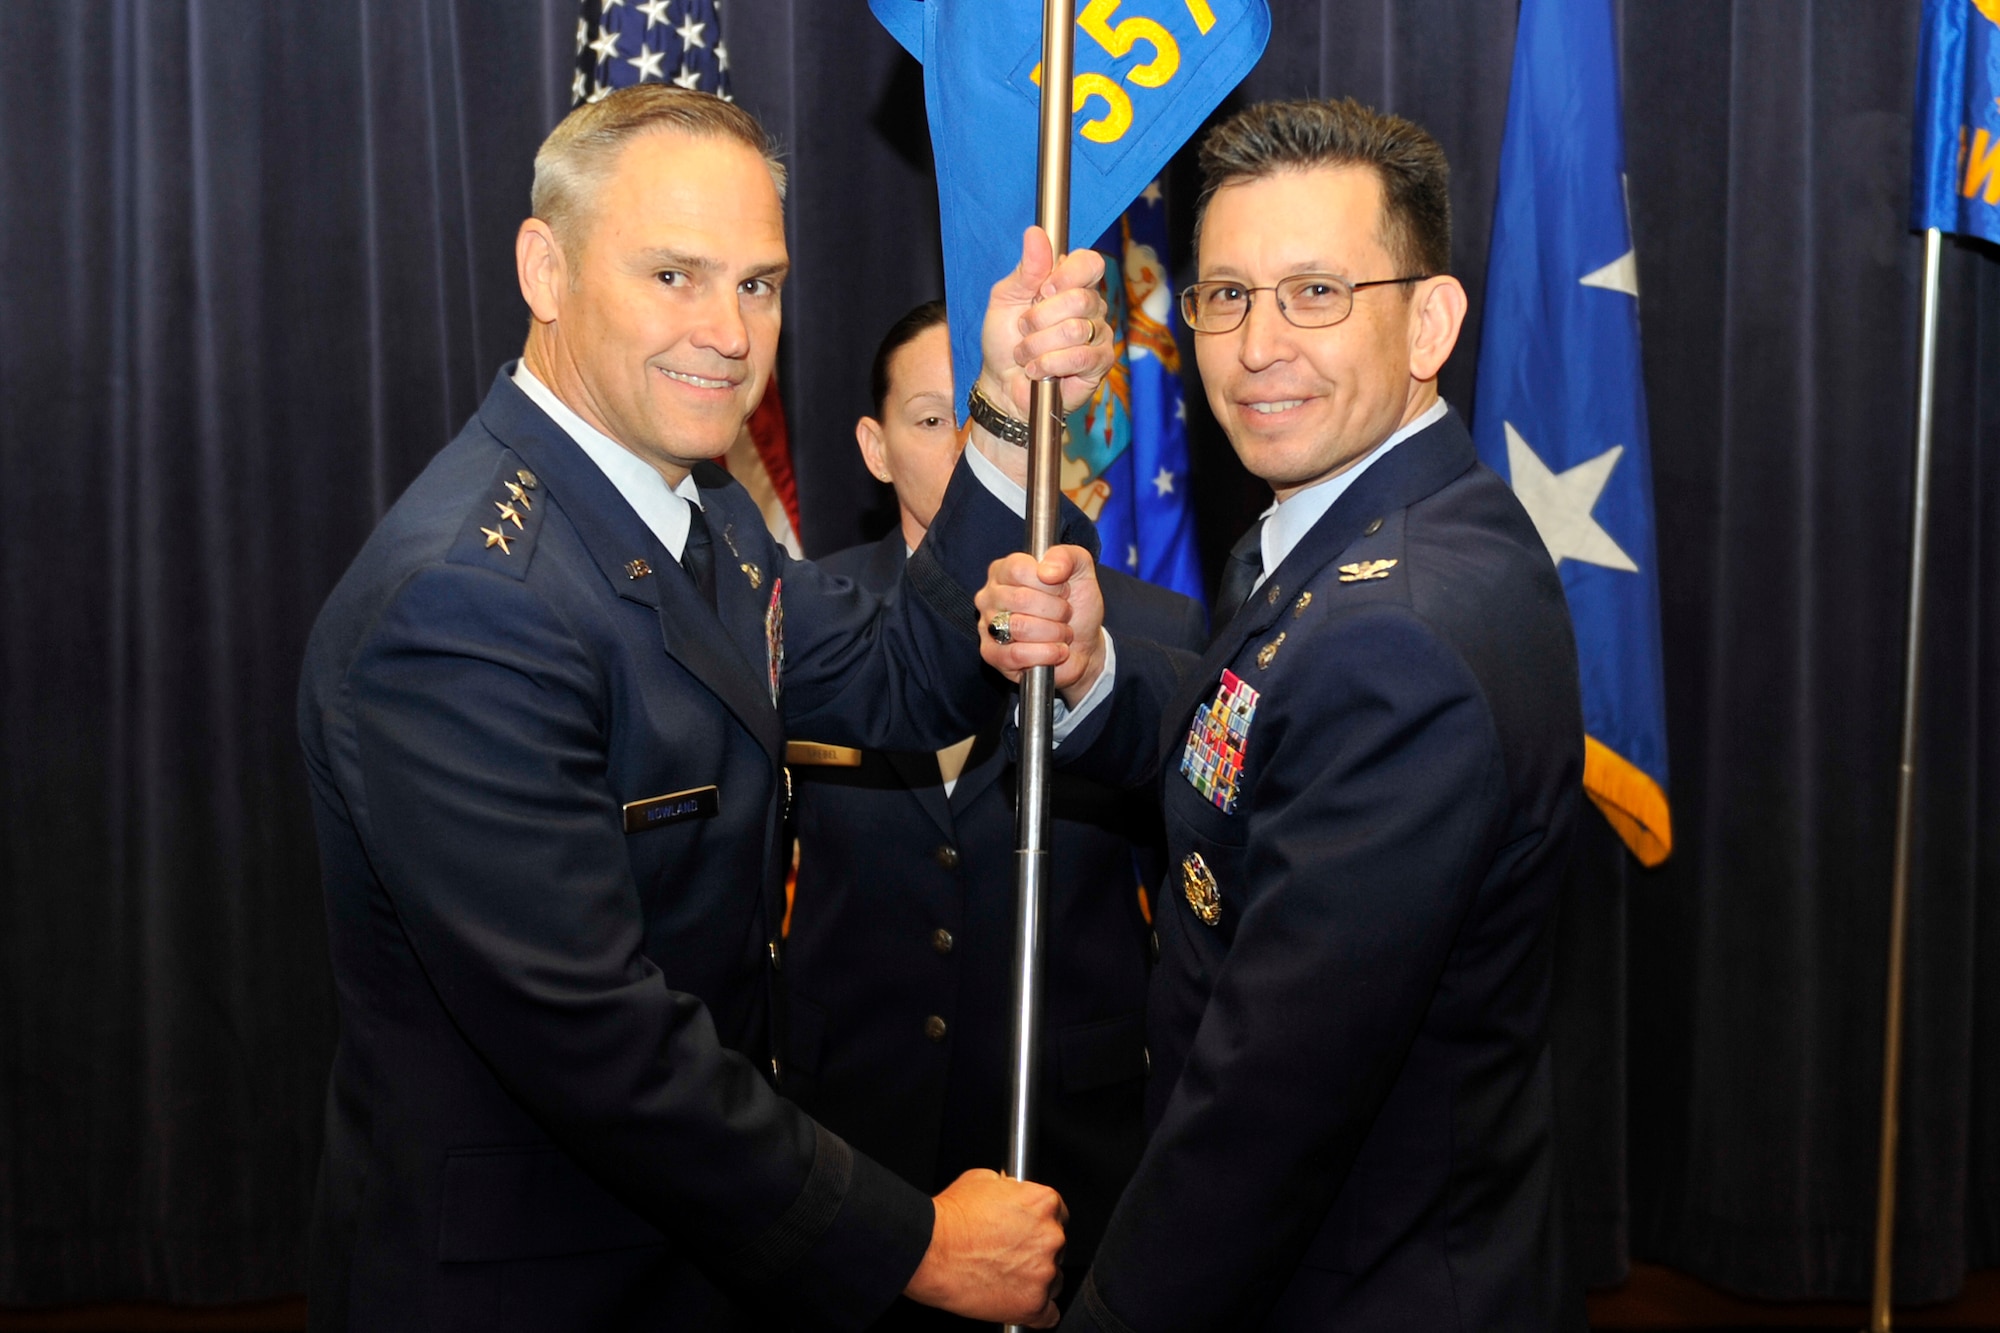 U.S. Air Force Lt. Gen. Chris Nowland, 12th Air Force commander, hands the 557th Weather Wing guidon to U.S. Air Force Col. William Carle, 557th Weather Wing commander, as part of the Air Force Weather Agency’s re-designation to the 557th WW March 27 at the Lt. Gen. Thomas S. Moorman building, Offutt Air Force Base, Nebraska. The Wing, previously a Field Operating Agency, will now fall under Air Combat Command and the 12th Air Force. (U.S. Air Force photo by Jeff Gates/Released)